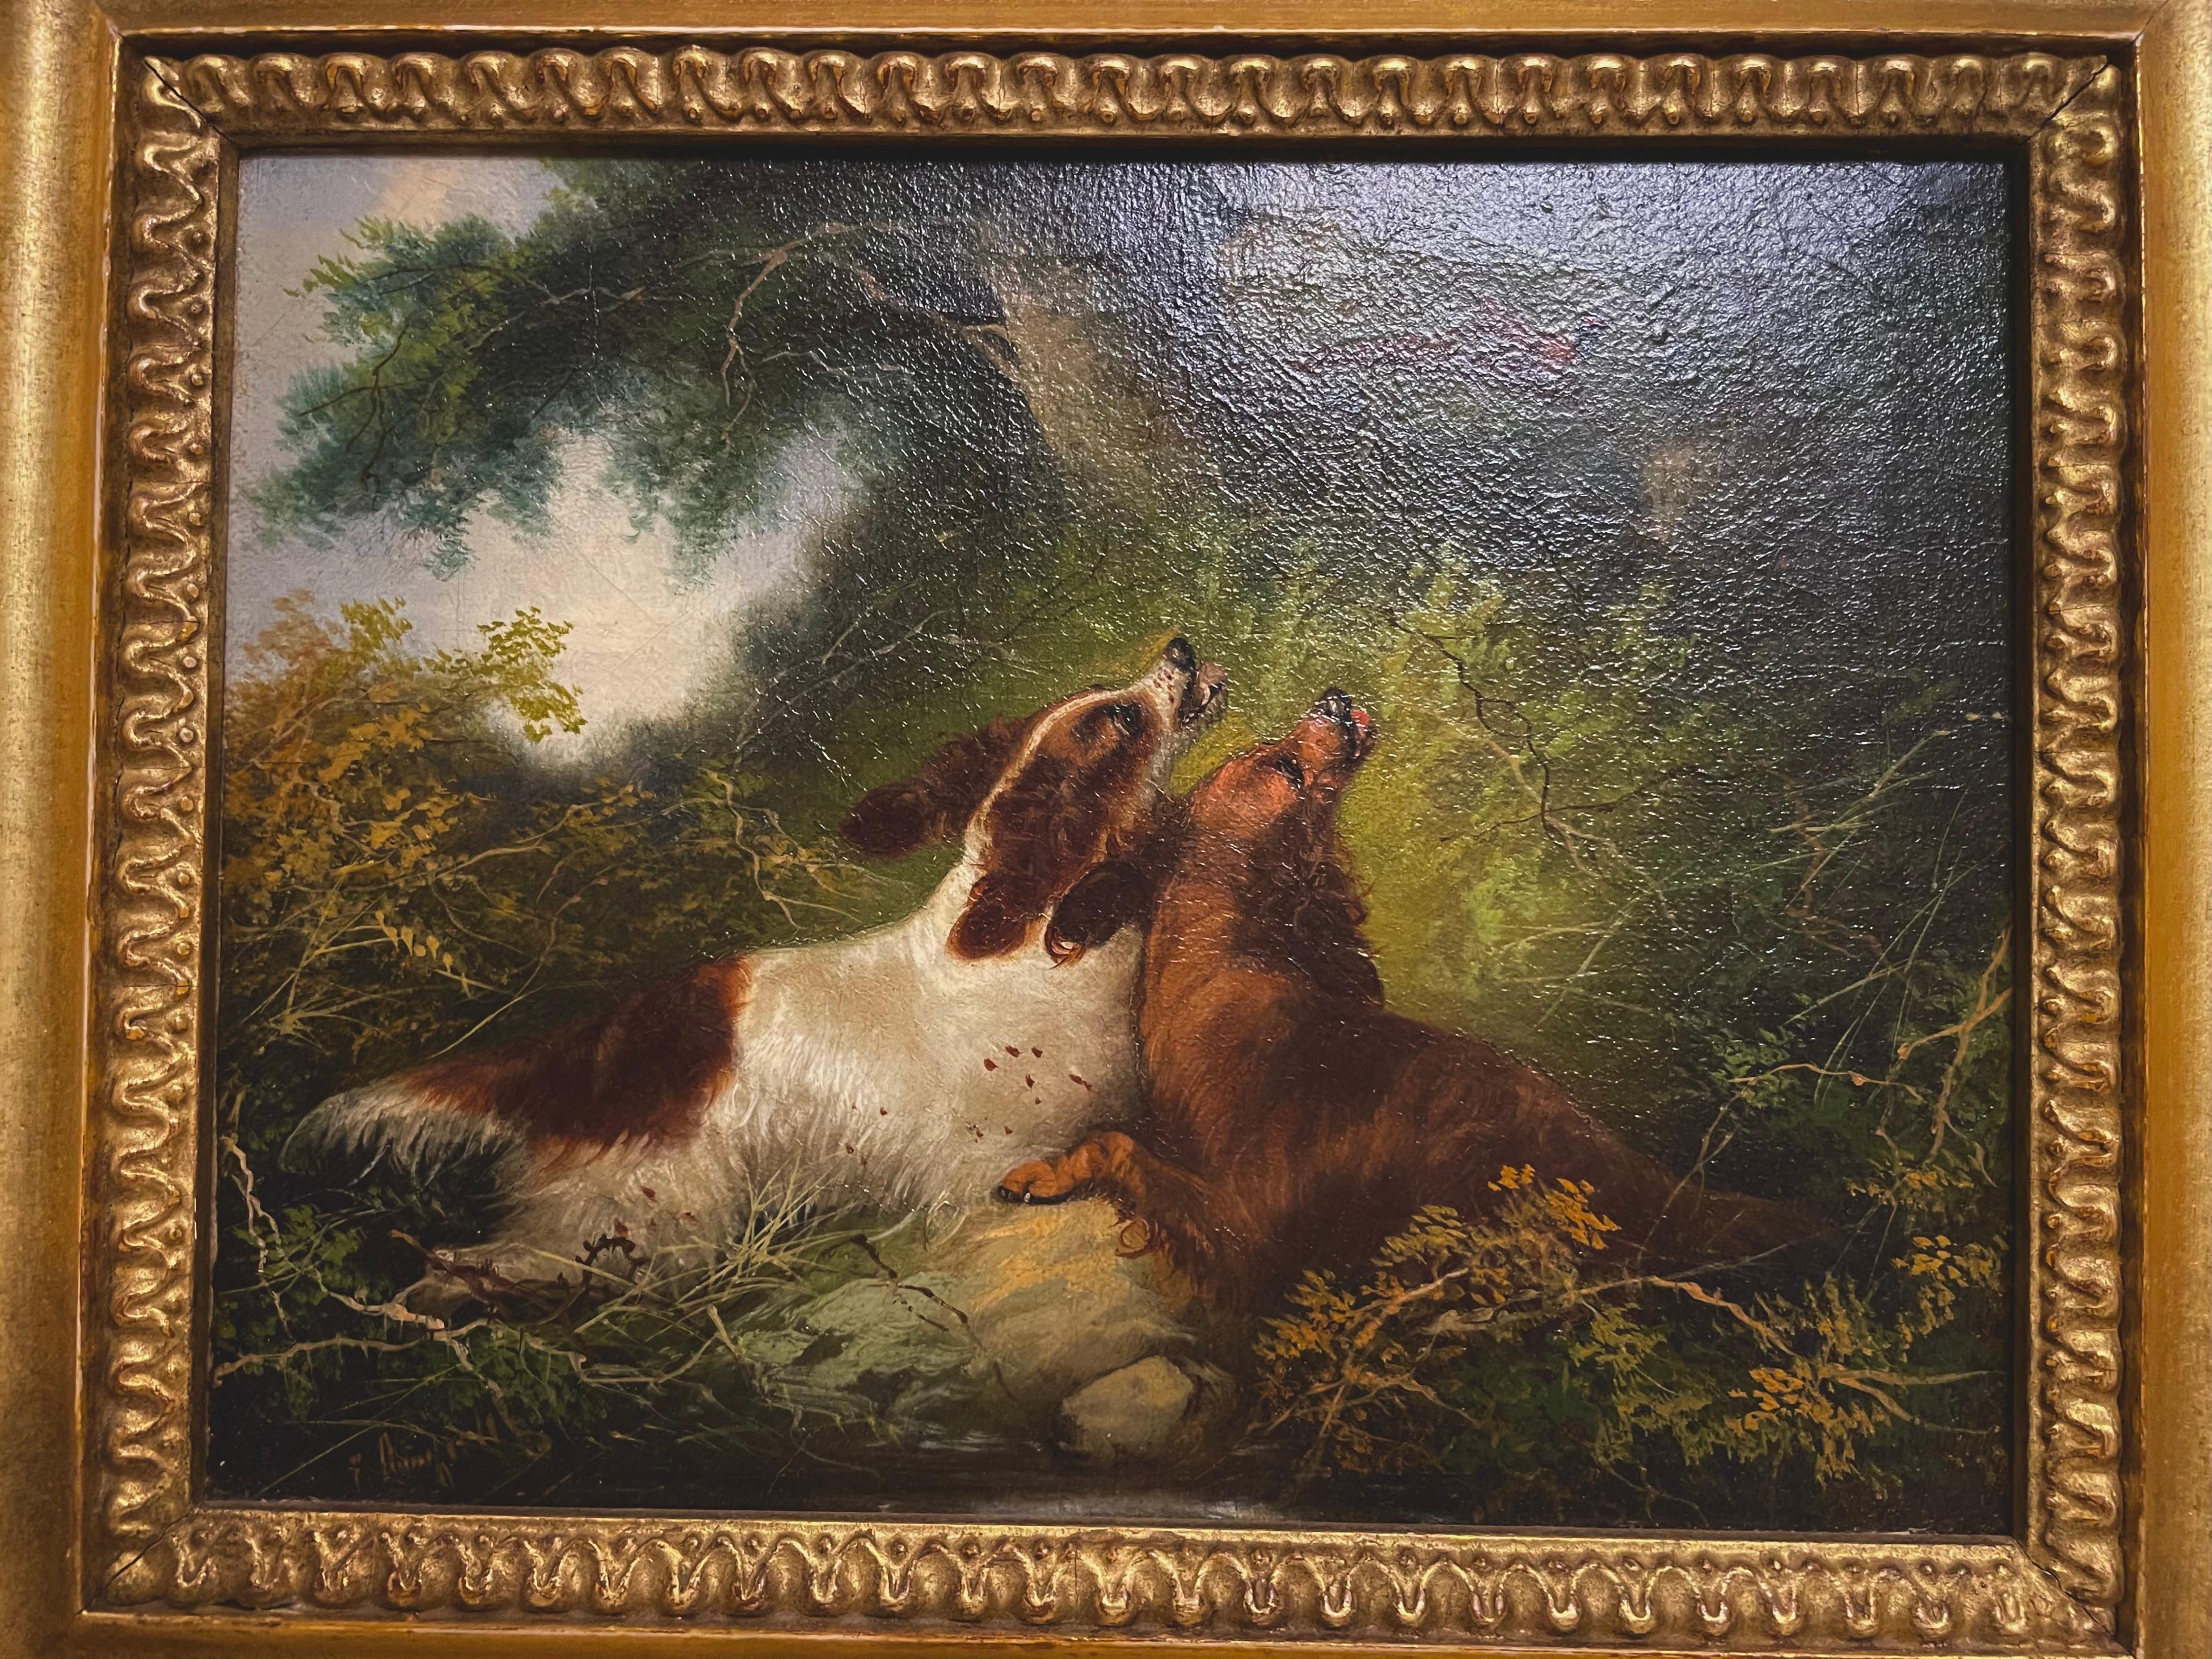 Charming oil painting on canvas by renowned genre artist George Armfield (1808-1893), of two dogs chasing a pheasant. The expression of  sheer dog happiness in the chase. and the pheasant at a safe distance, contribute to the delightful character of